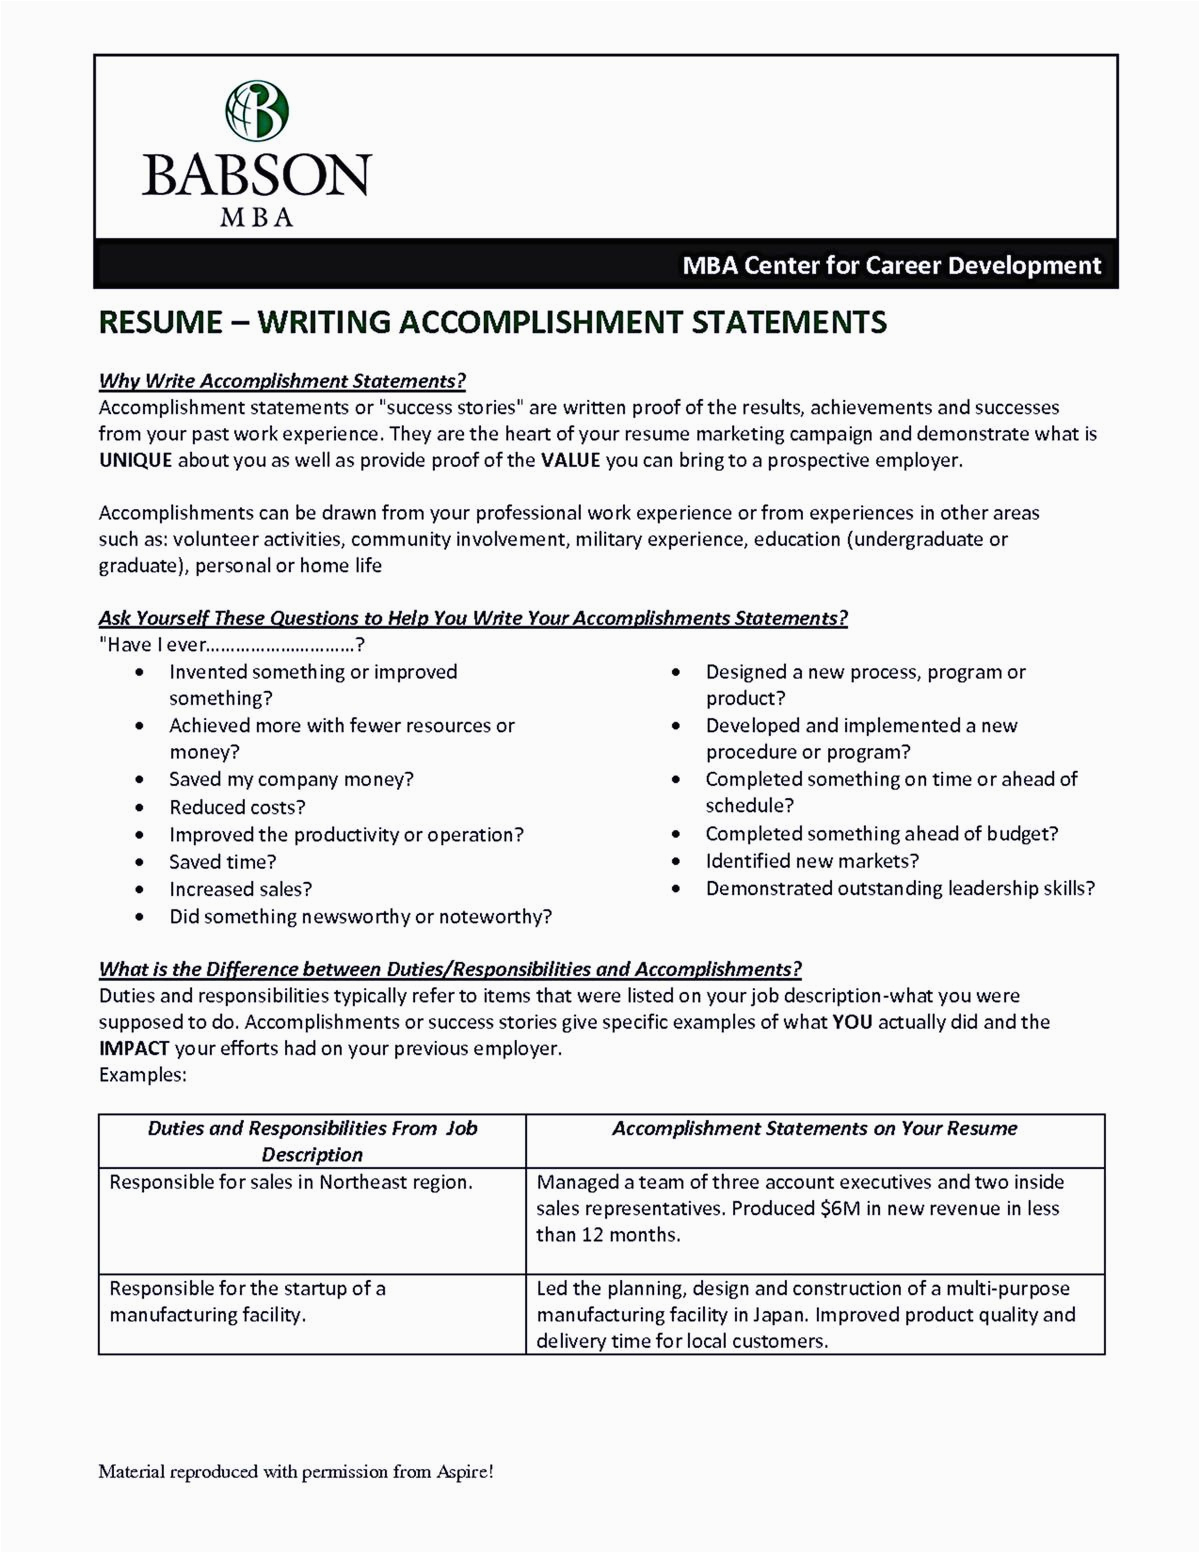 Sample List Of Accomplishments On A Resume Ac Plishments Resume are Indeed Important Part Of Any Resumes You